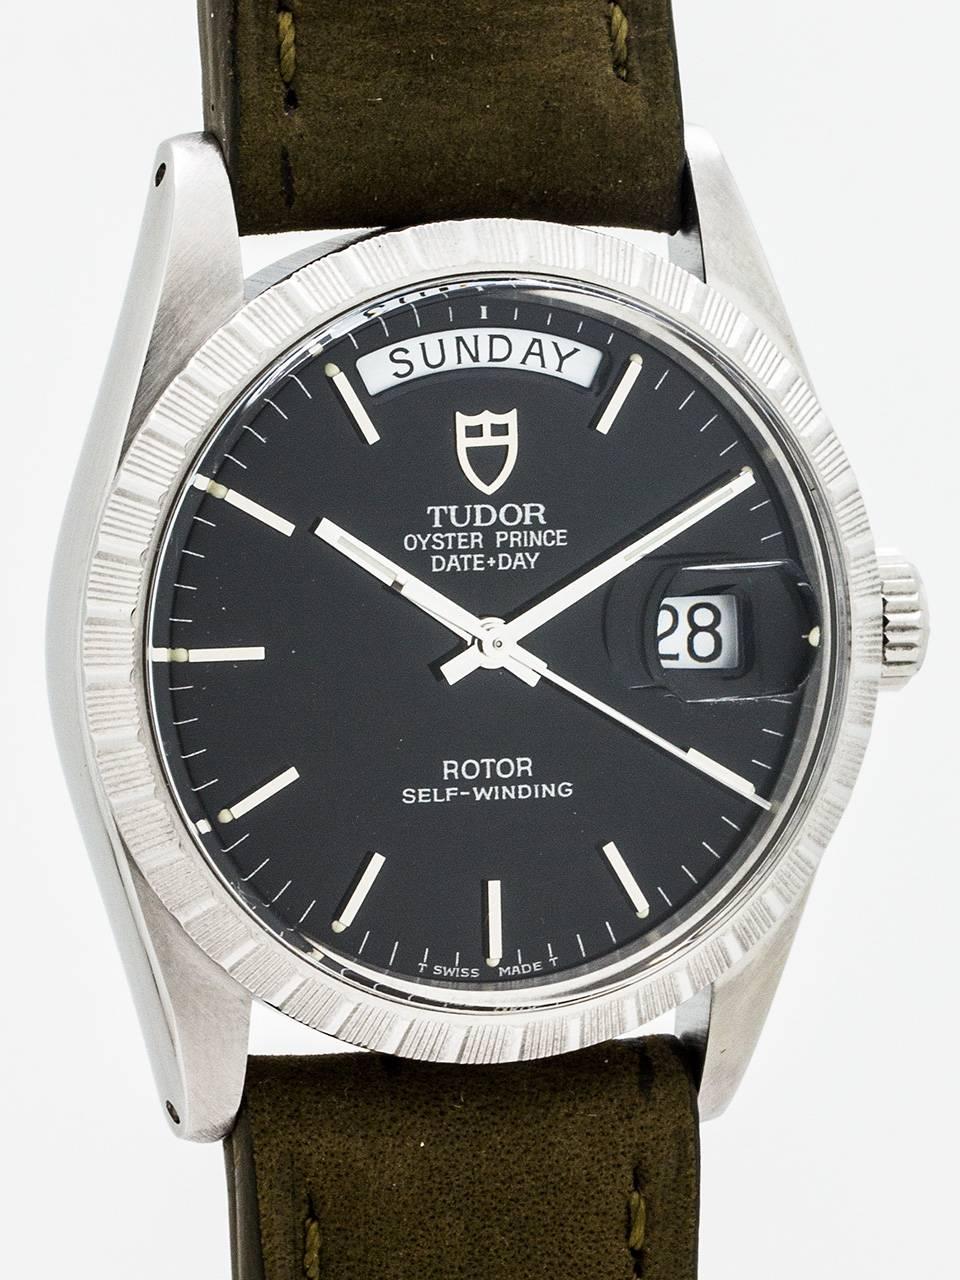 Tudor Stainless Steel Day-Date Wristwatch ref 94510 serial no 294,xxx circa 1960. Featuring 36mm diameter Oyster case with engine turned bezel and acrylic crystal. Beautiful condition original matte black dial with applied silver indexes and silver